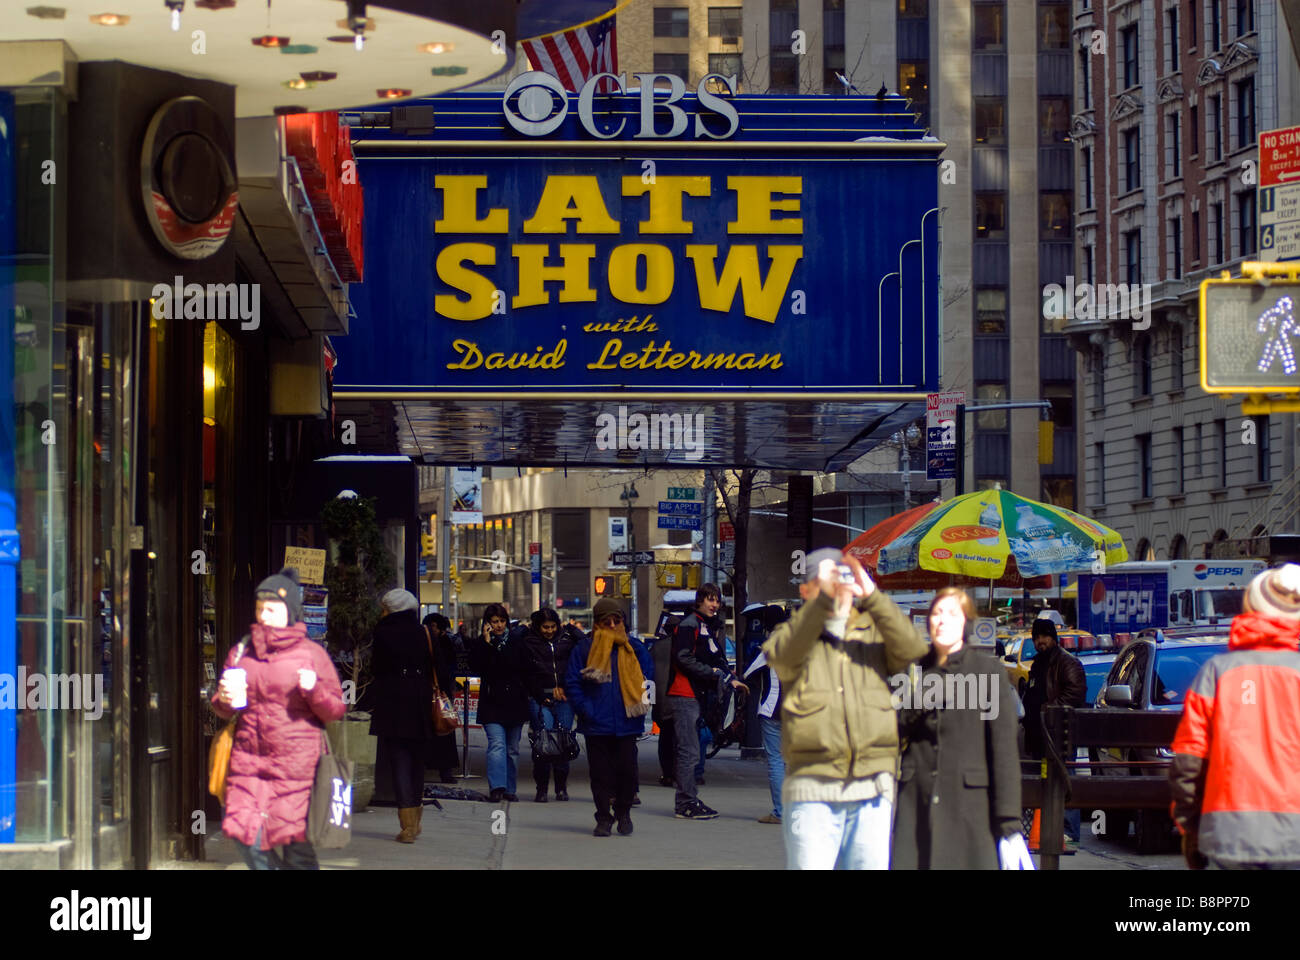 The Ed Sullivan Theater on Broadway in New York where the Late Show with David Letterman show is taped Stock Photo